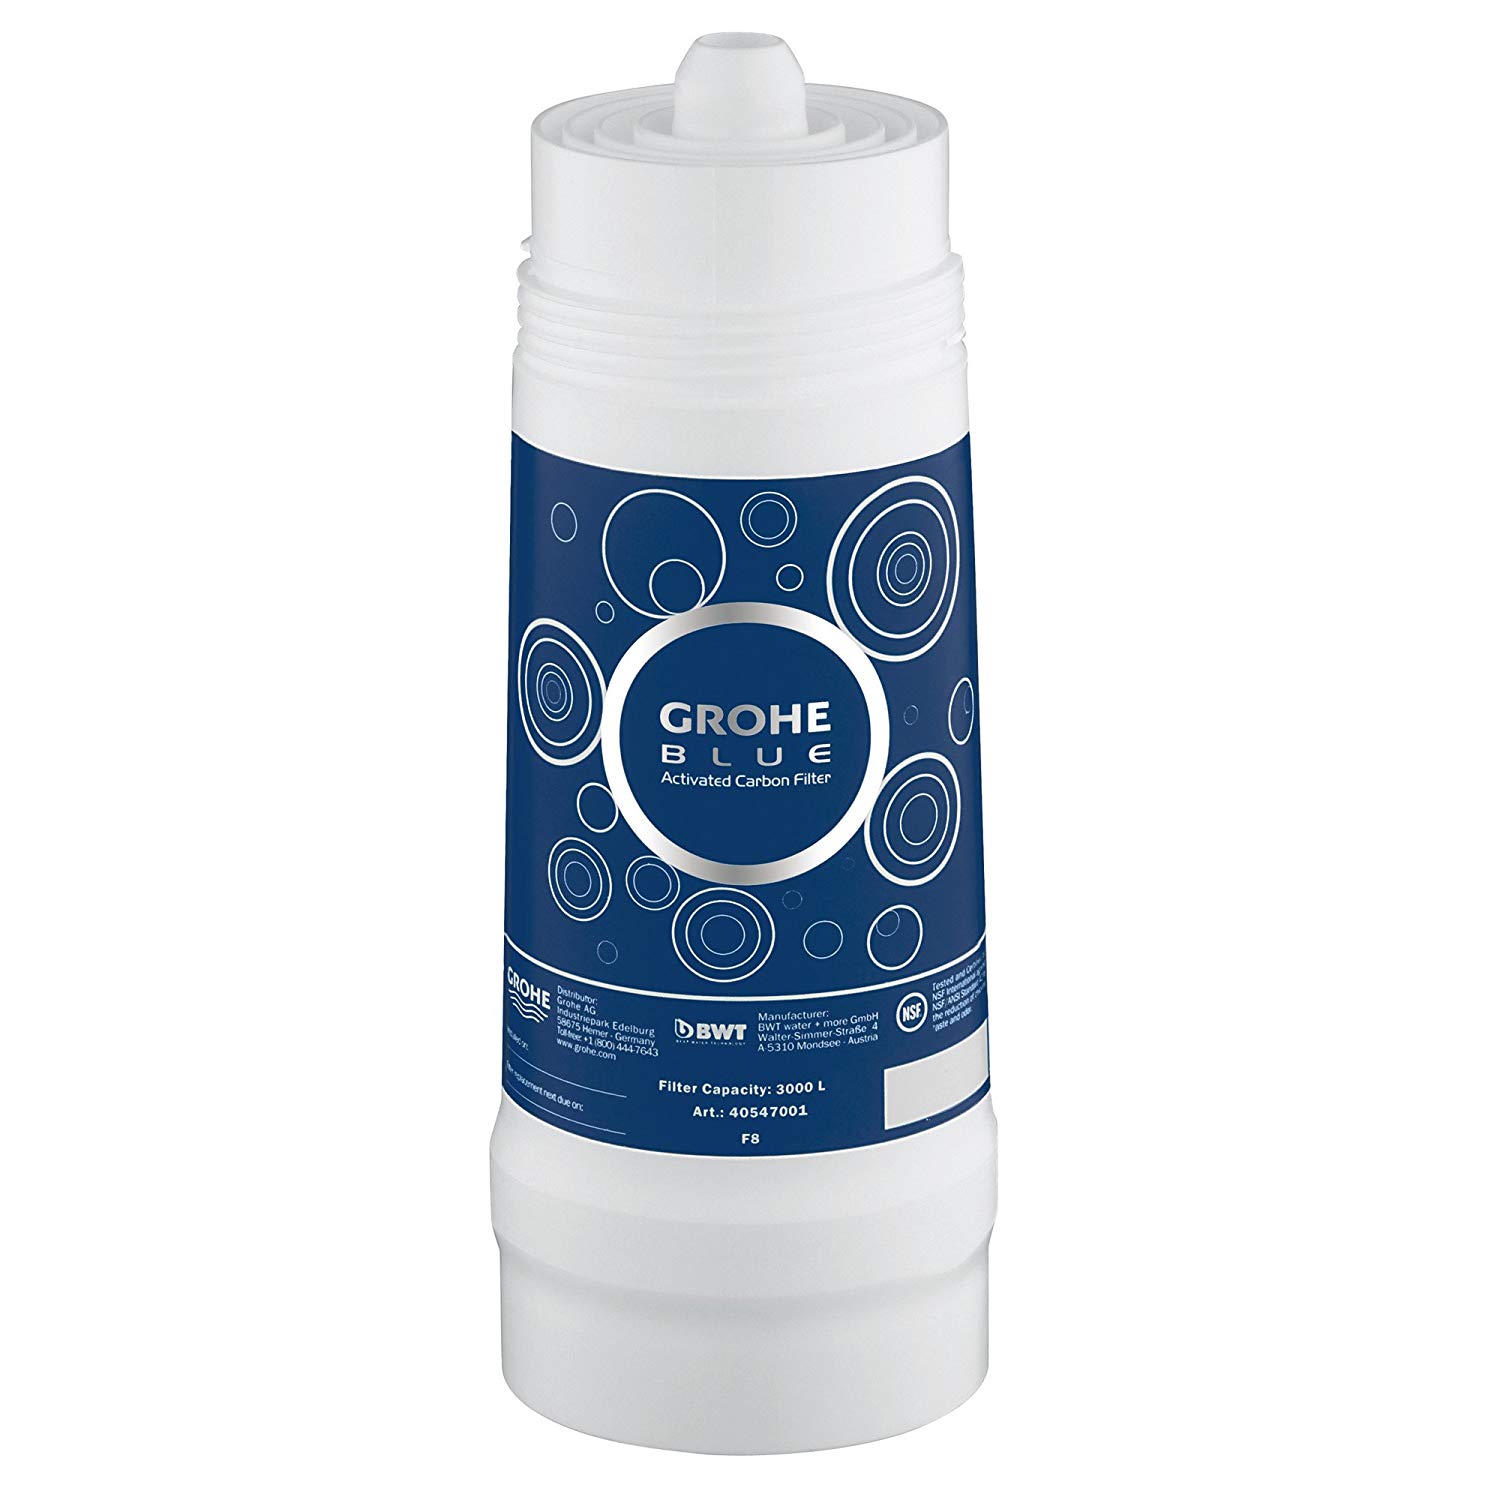 Grohe Blue Carbon Filter